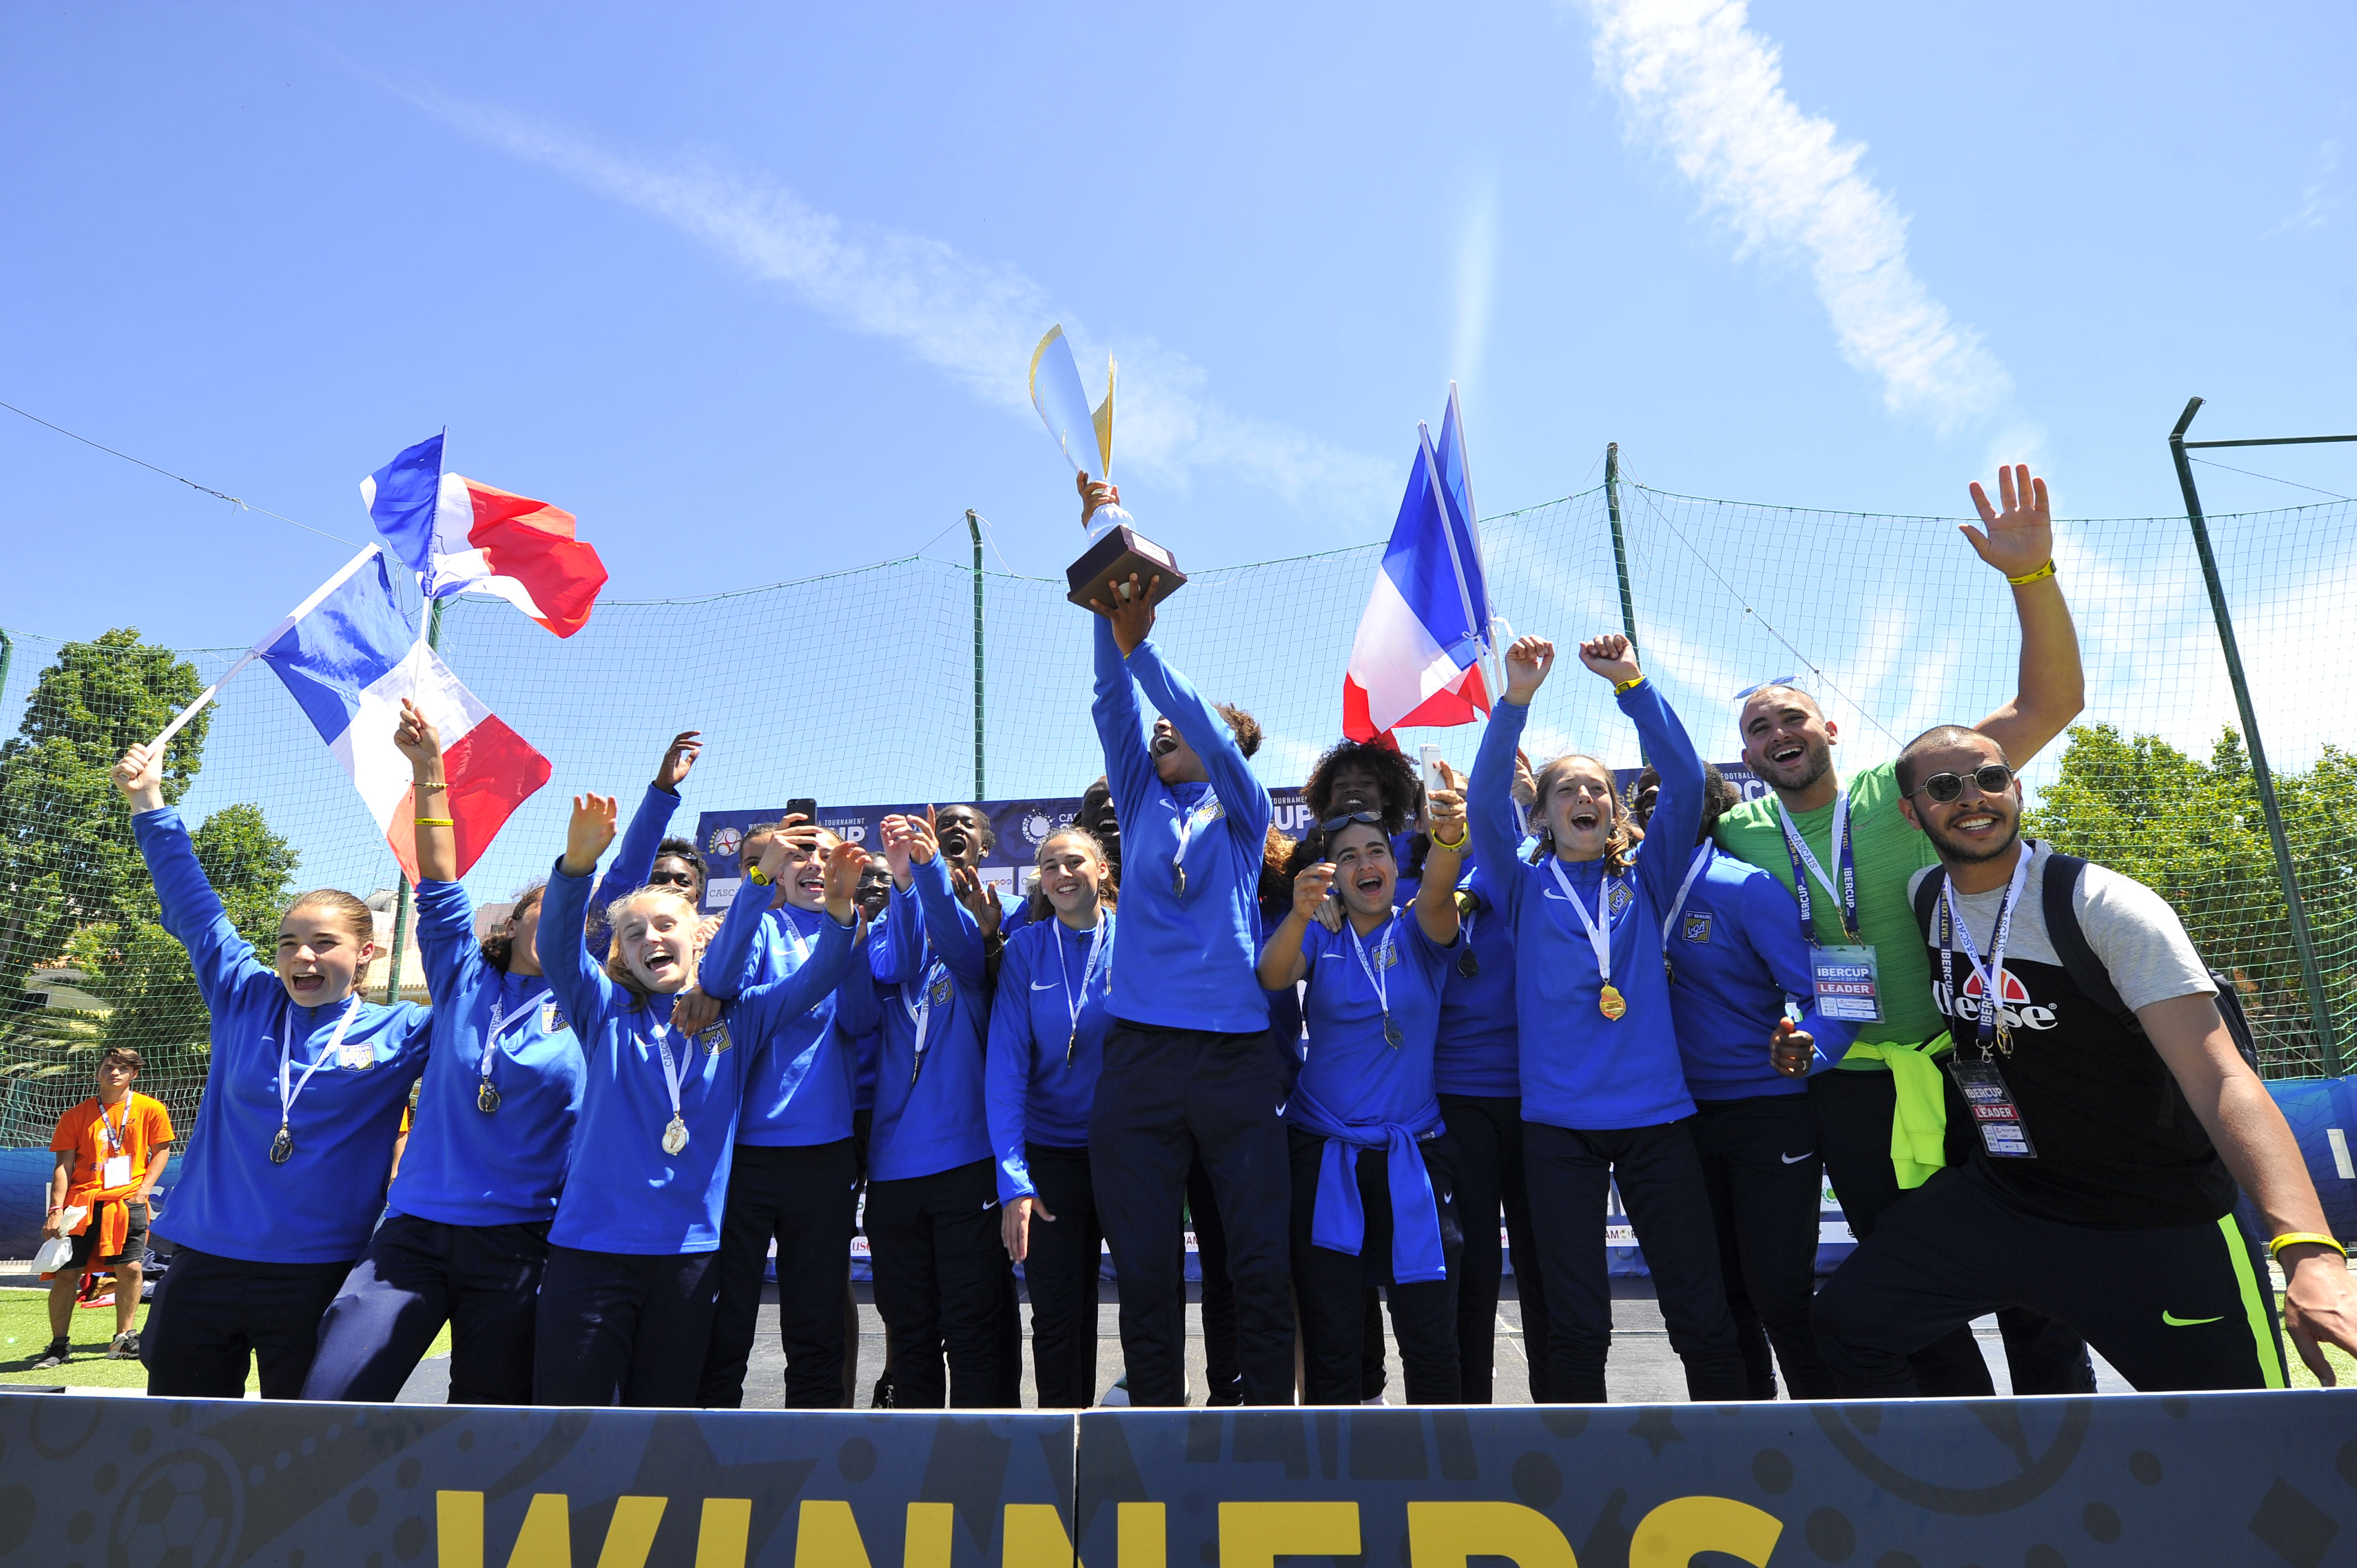 IberCup Estoril - team from France - winners - Road to Sport